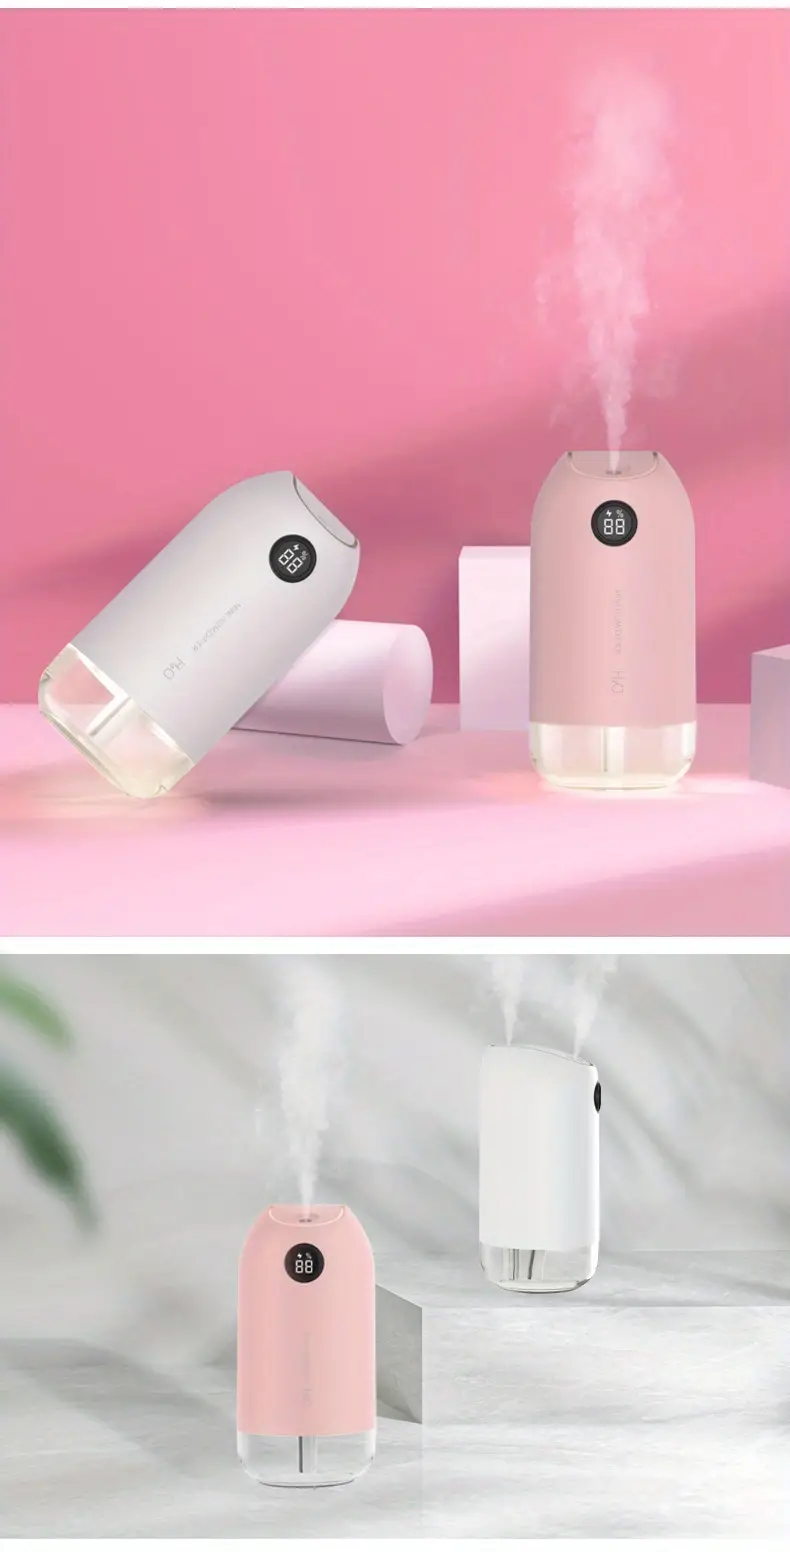 portable mini humidifier 500ml small humidifier type c personal desktop humidifier for baby bedroom travel office car household water shortage protection 2 spray modes super quiet night light white details 7